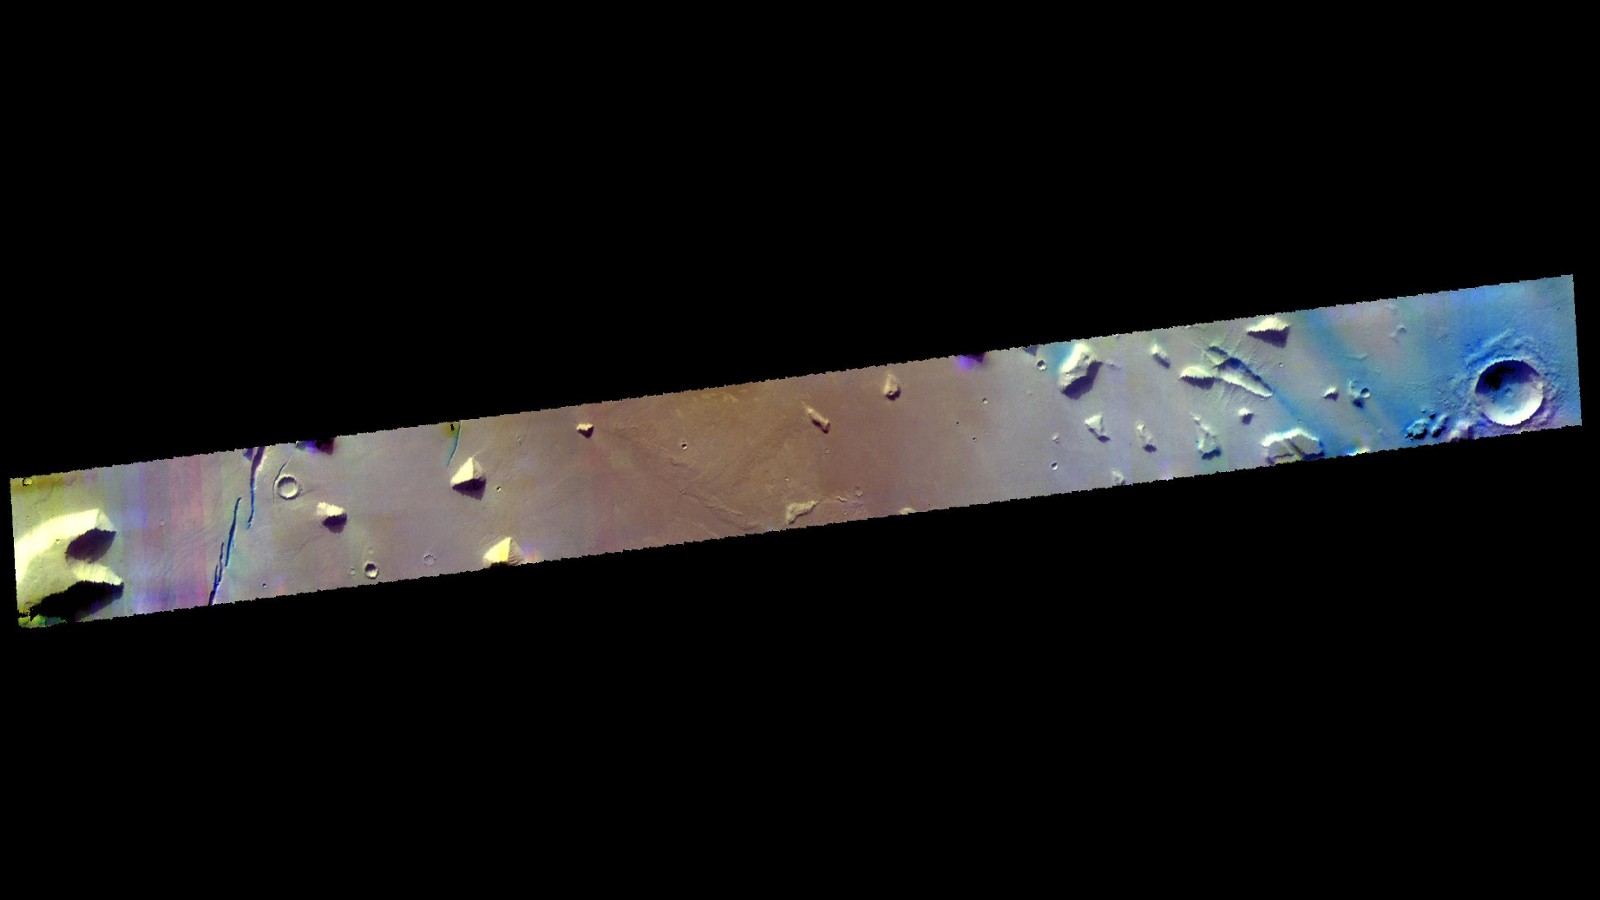 Here we see a false color image of Elysium Planitia on Mars. The linear depressions on the left are created by tectonic faults.